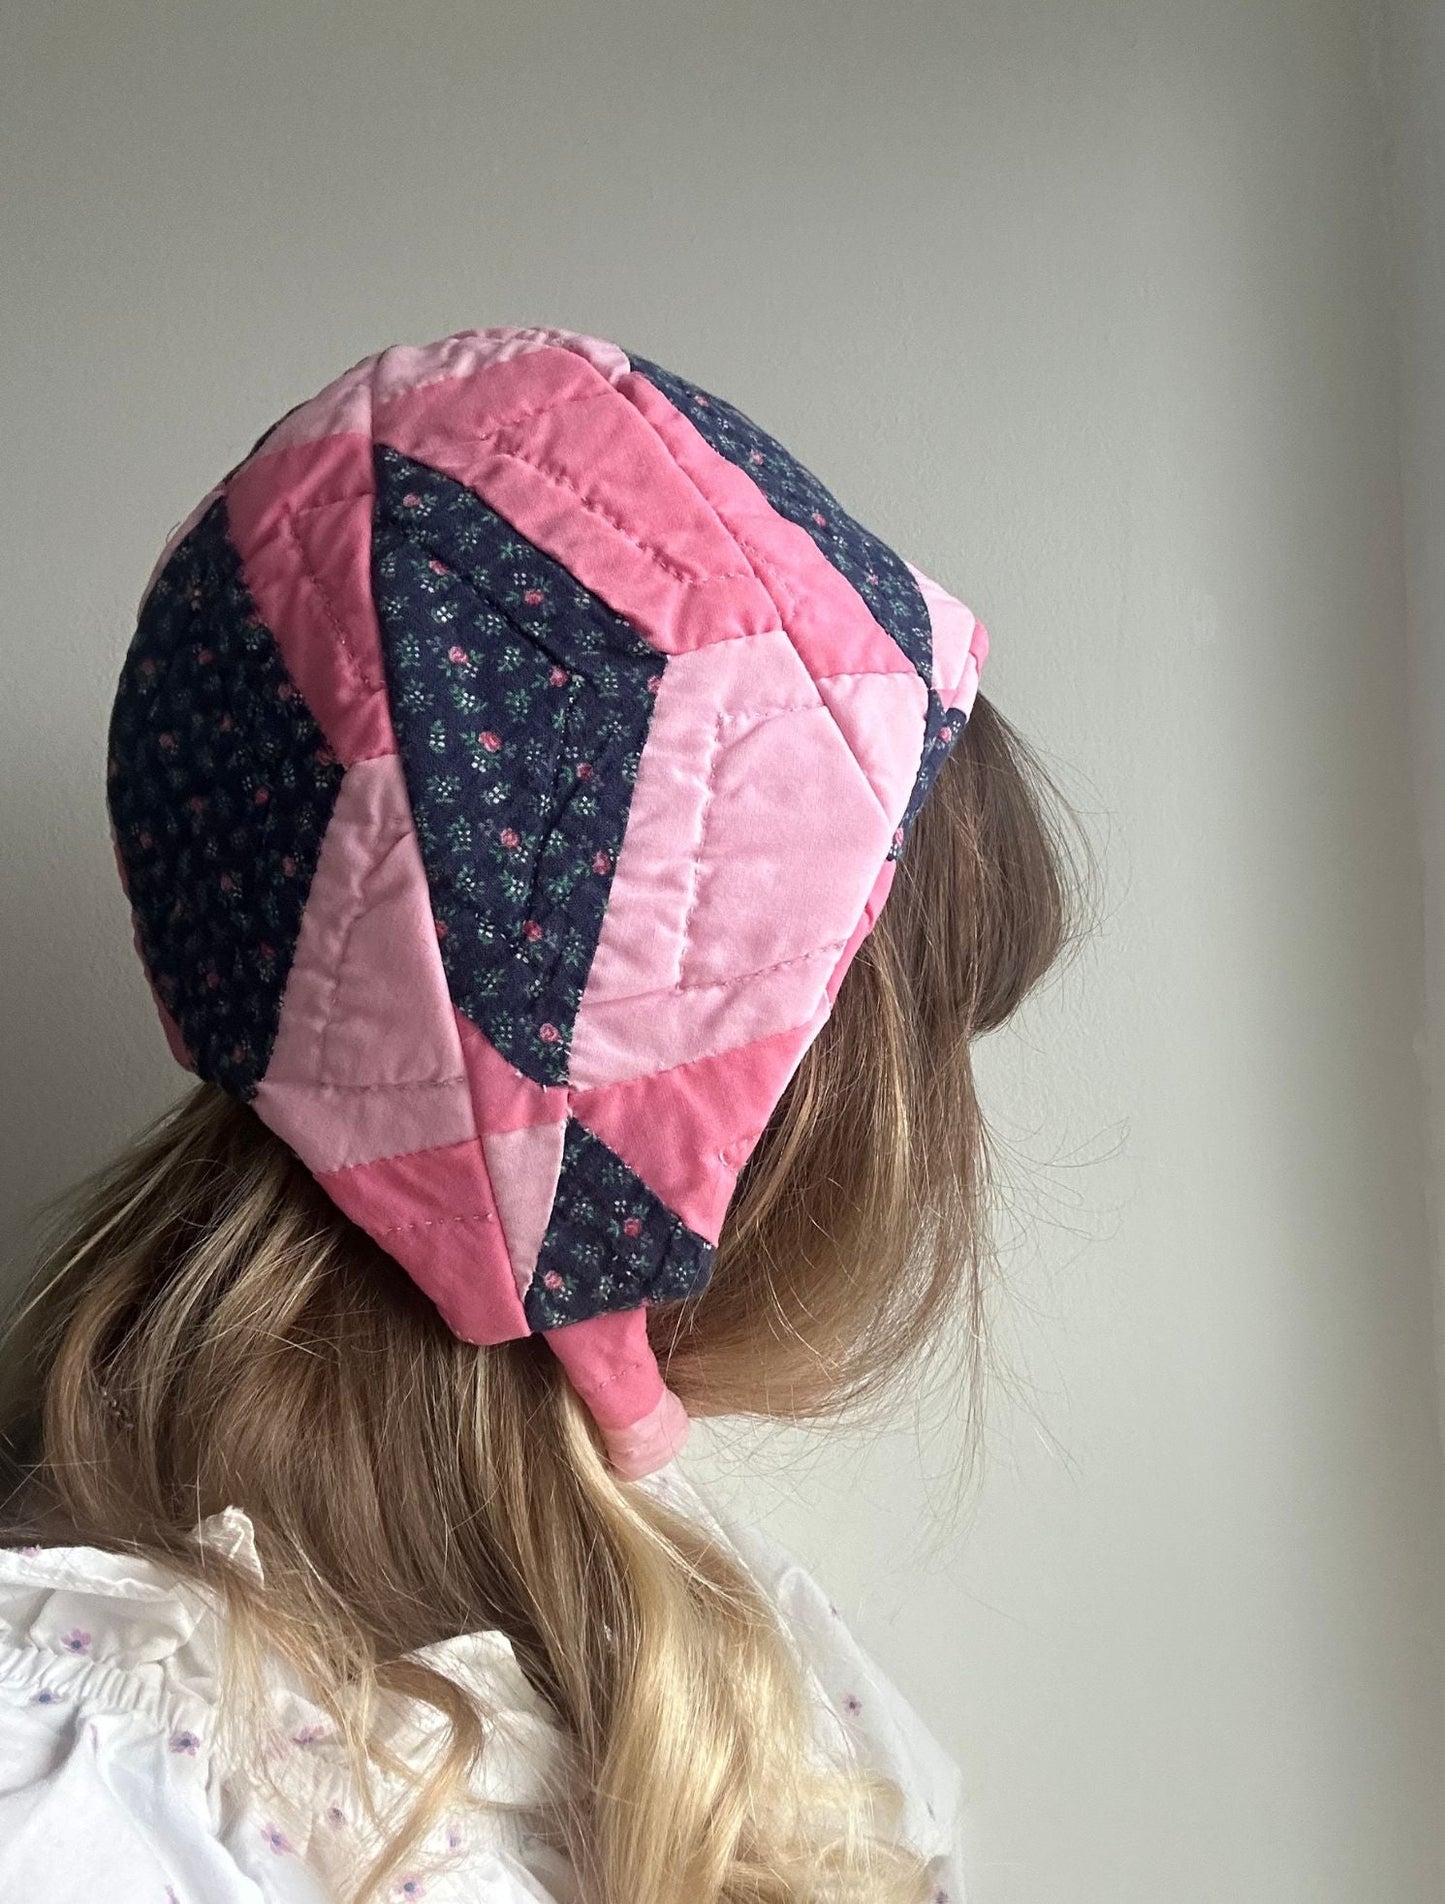 Quilted Cap - Holly Hobbie - Sample